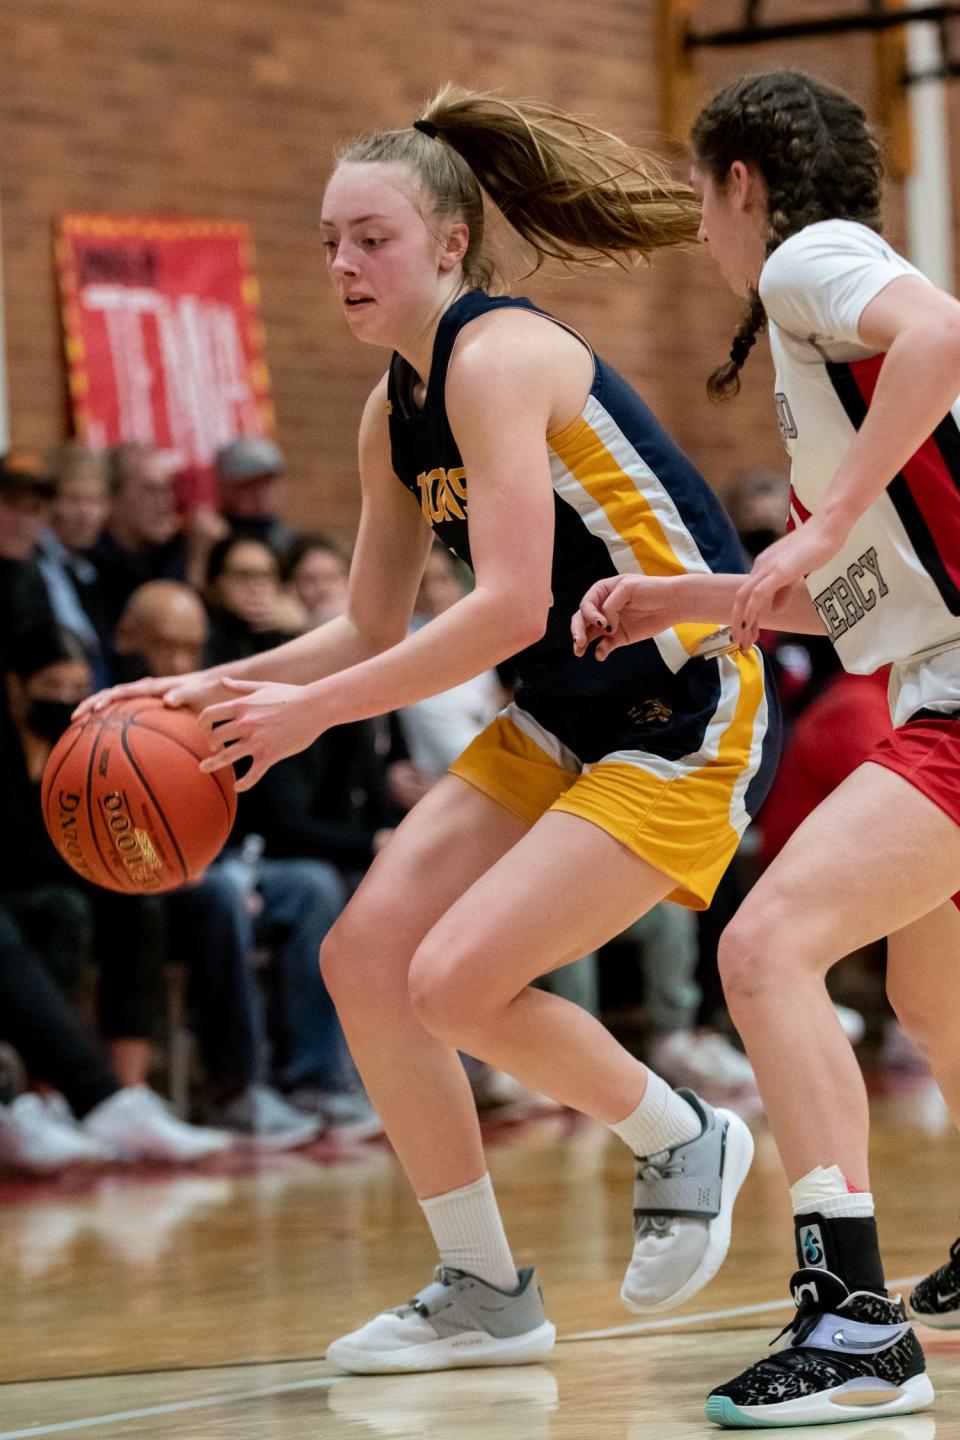 New Hope-Solebury's Reagan Chrencik dribbles while guarded by Gwynedd Mercy's Bianca Coleman in a District One Class 4A semifinal game, on Tuesday, February 22, 2022, at Gwynedd Mercy Academy High School in Lower Gwynedd. The Monarchs advance to the title game after defeating the Lions 56-28.